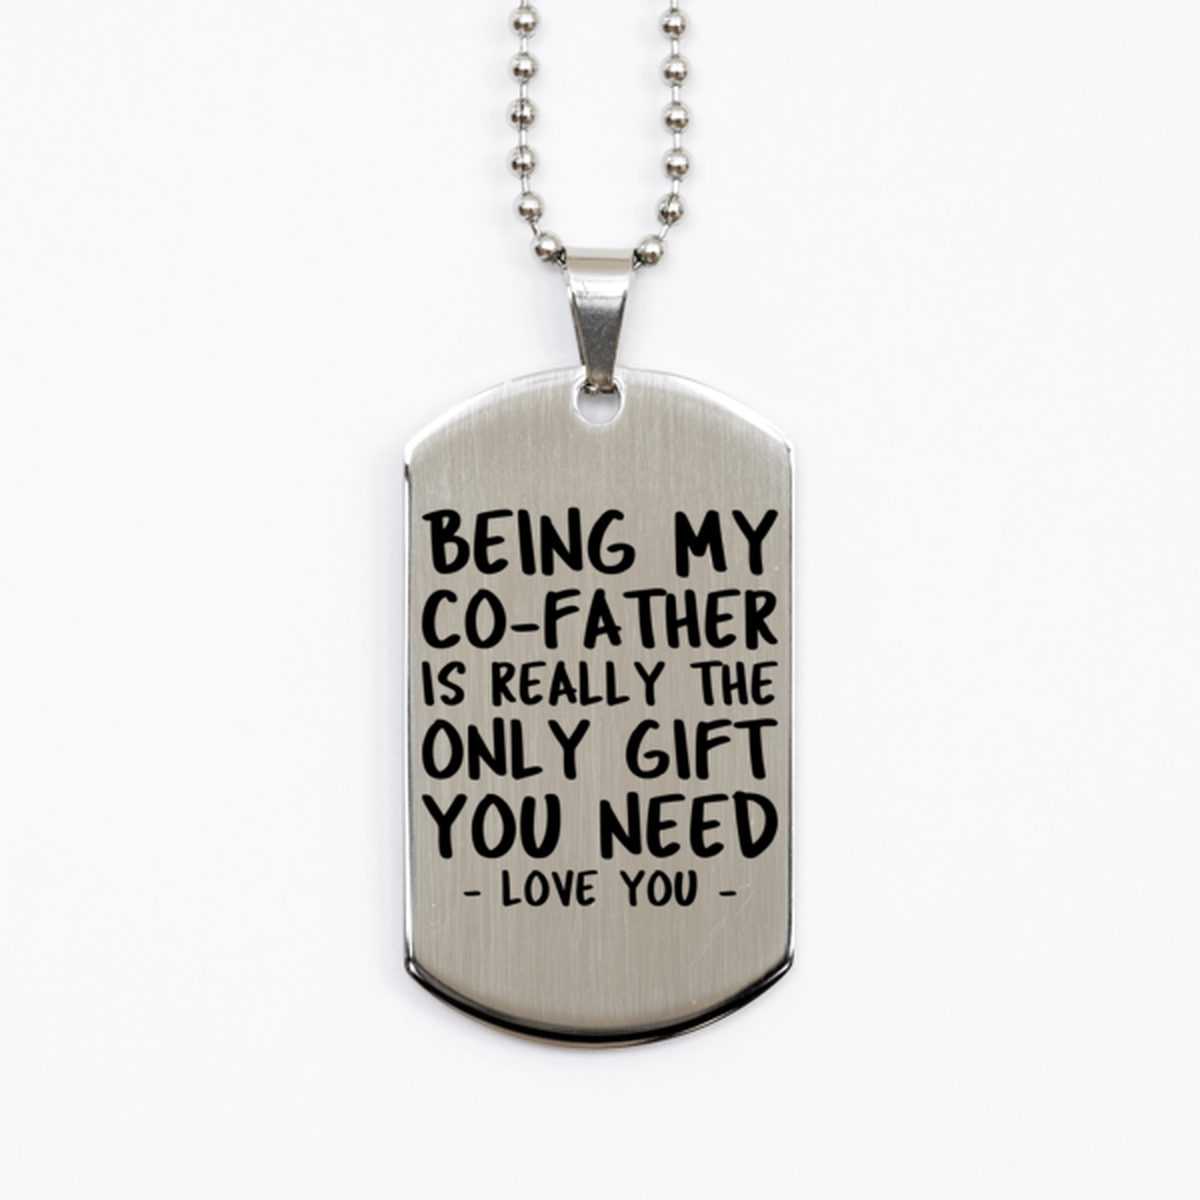 Funny Co-father Silver Dog Tag Necklace, Being My Co-father Is Really the Only Gift You Need, Best Birthday Gifts for Co-father